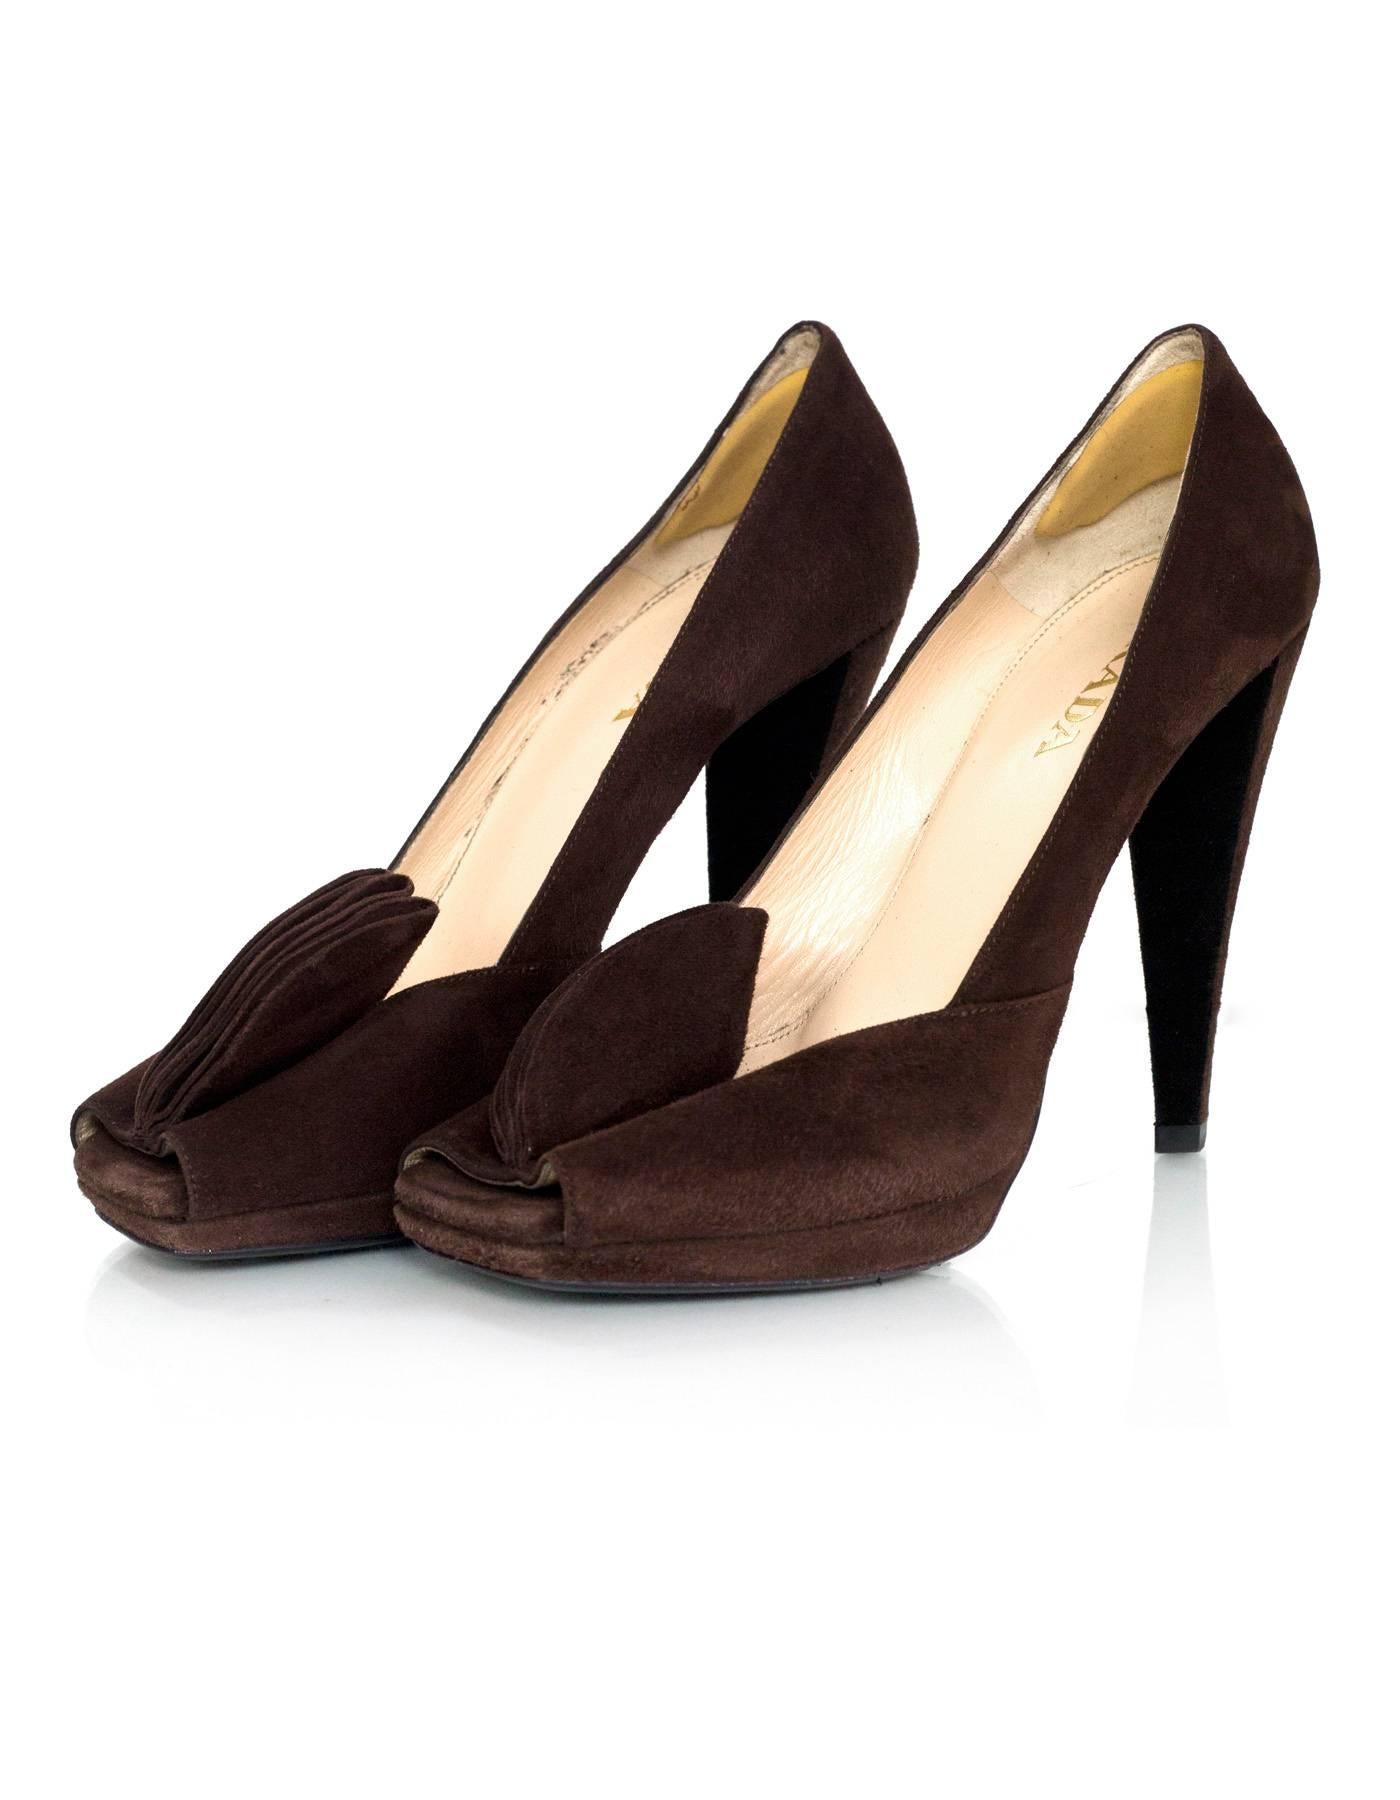 Prada Brown Suede Square Peep-Toe Pumps 
Features pedals at peep-toe

Made In: Italy
Color: Brown
Materials: Suede
Closure/Opening: Slip on
Sole Stamp: Prada 37 Made in Italy
Overall Condition: Excellent pre-owned condition with the exception of